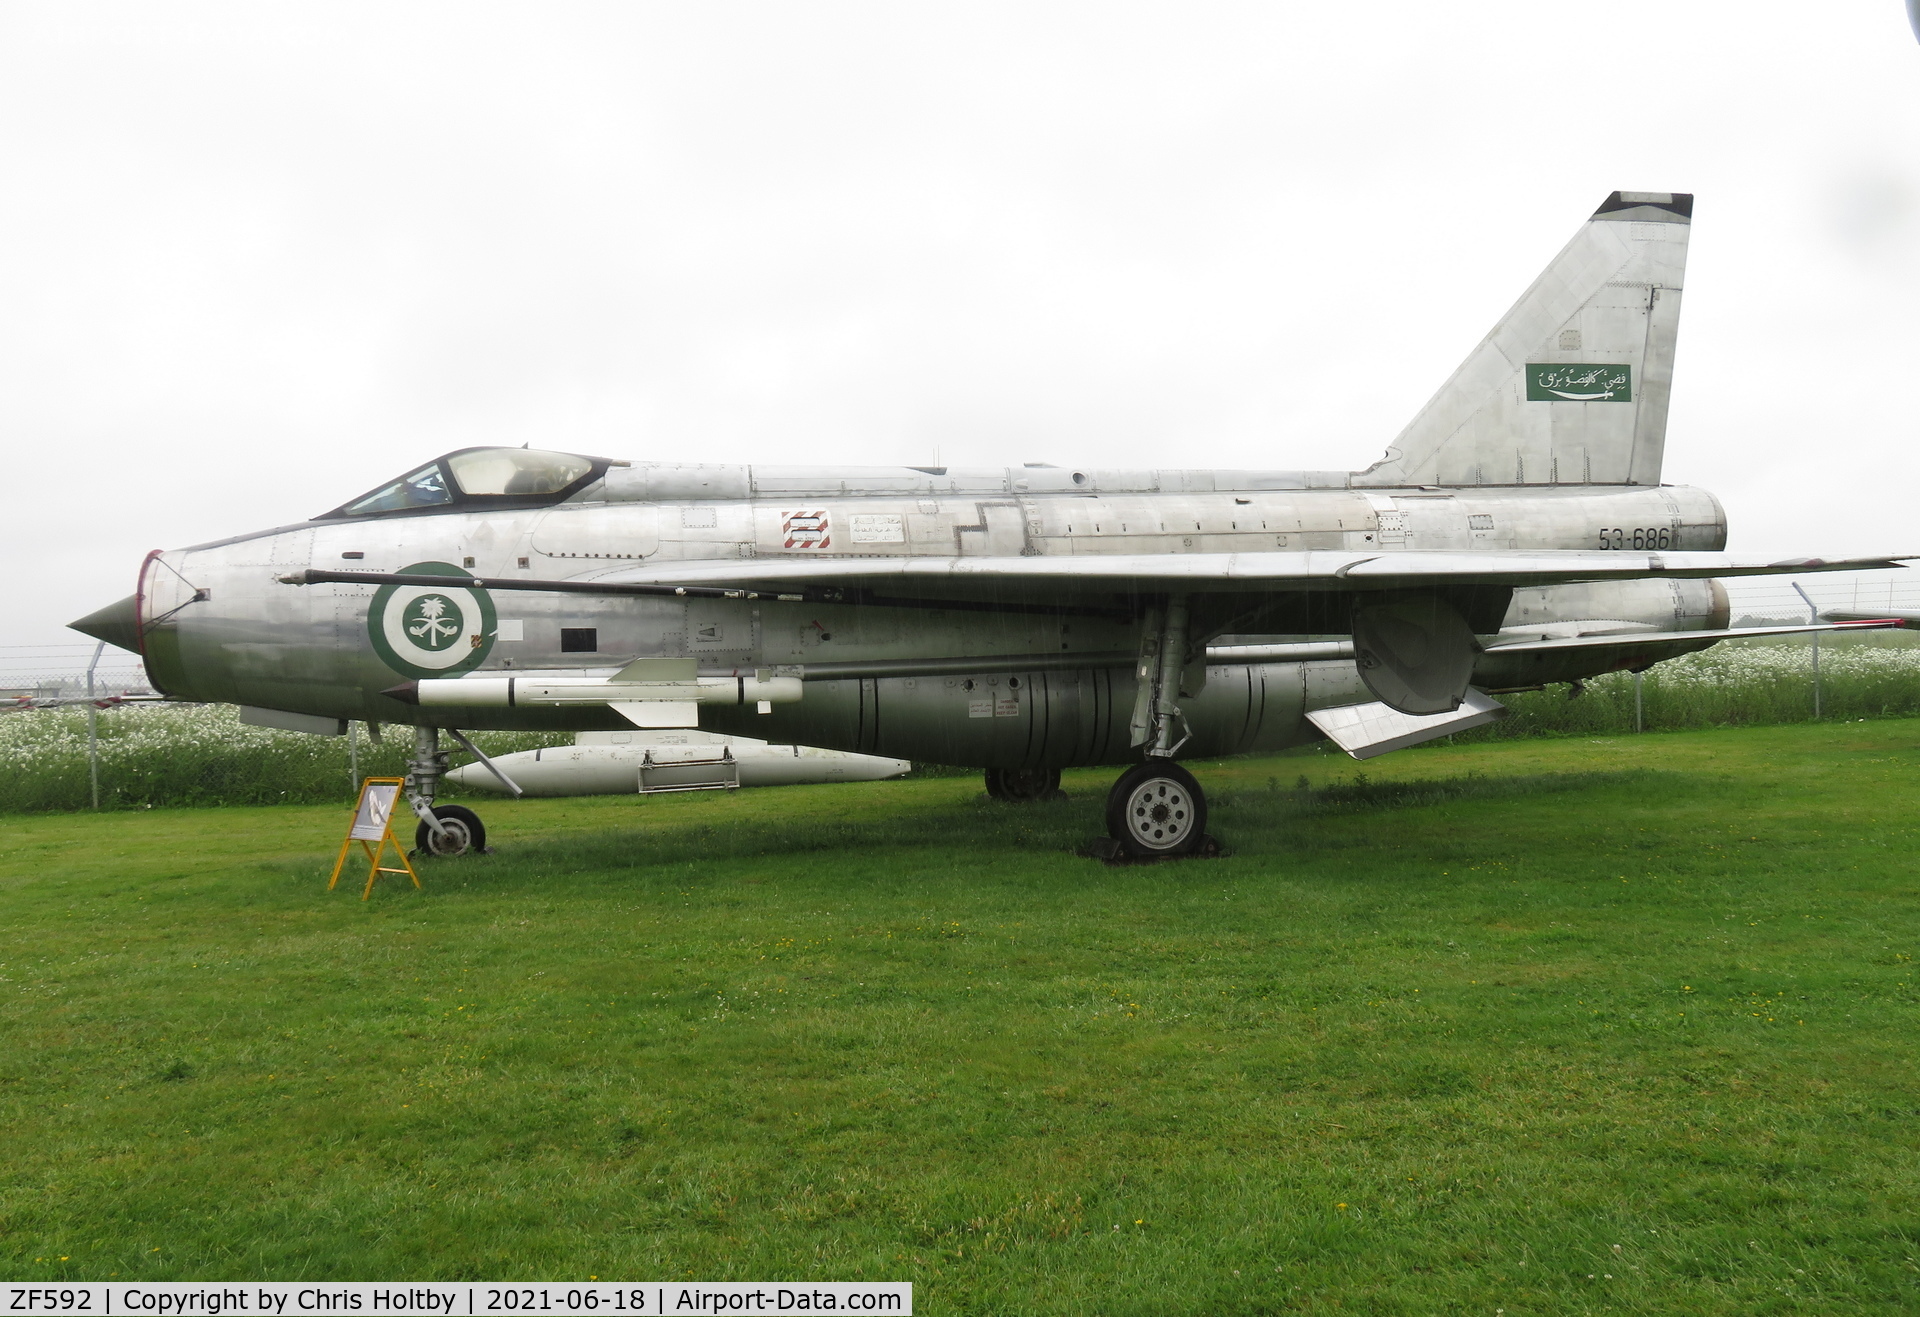 ZF592, 1968 English Electric Lightning F.53 C/N 95291, On static display at City of Norwich Aviation Museum in its Royal Saudi Air Force livery.